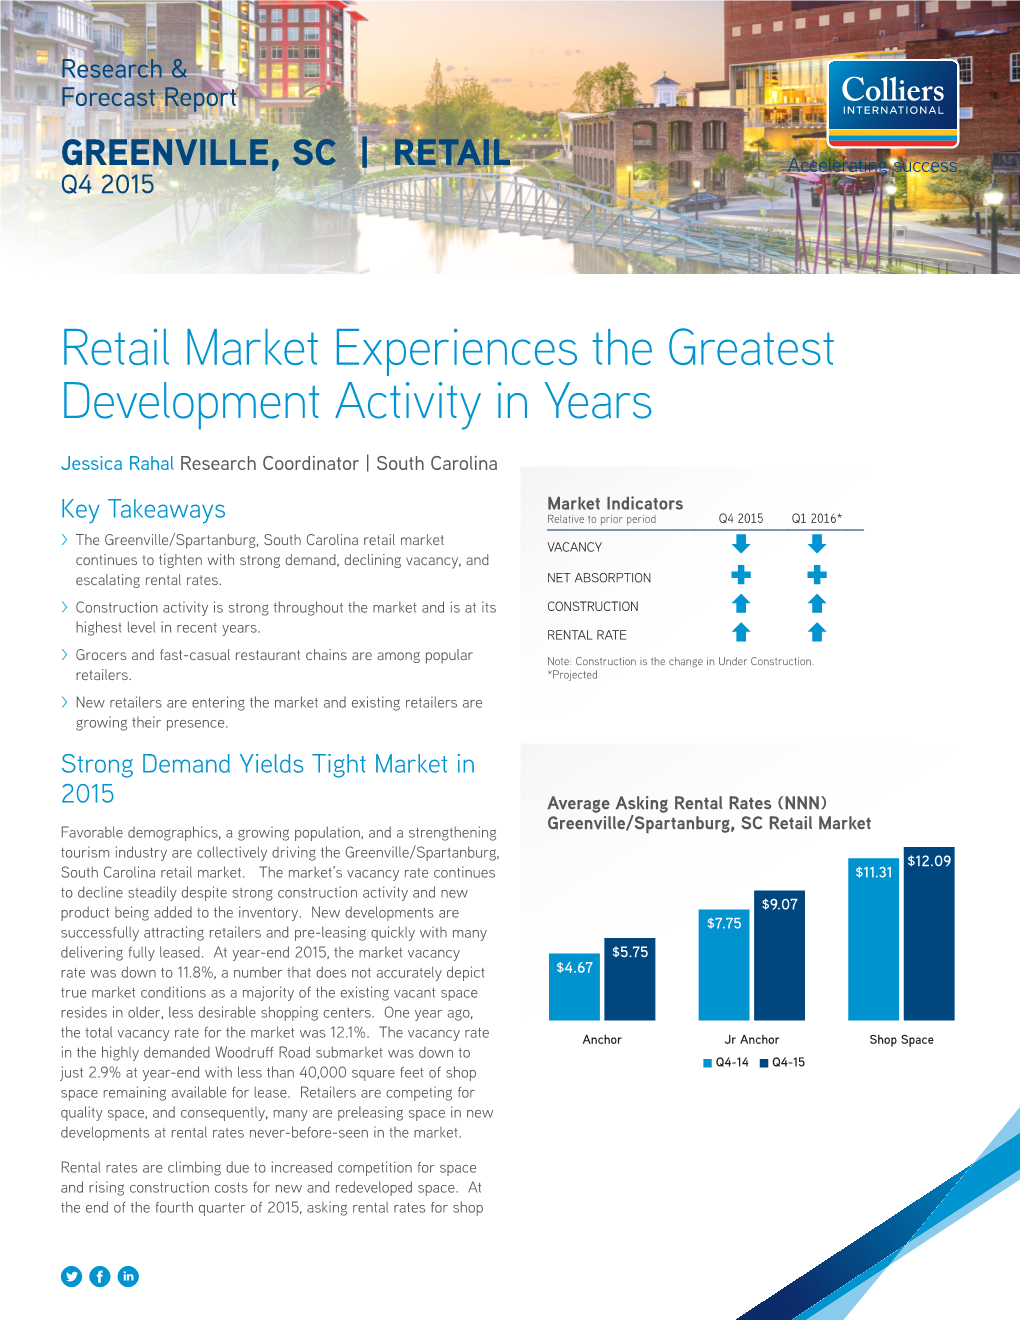 Retail Market Experiences the Greatest Development Activity in Years